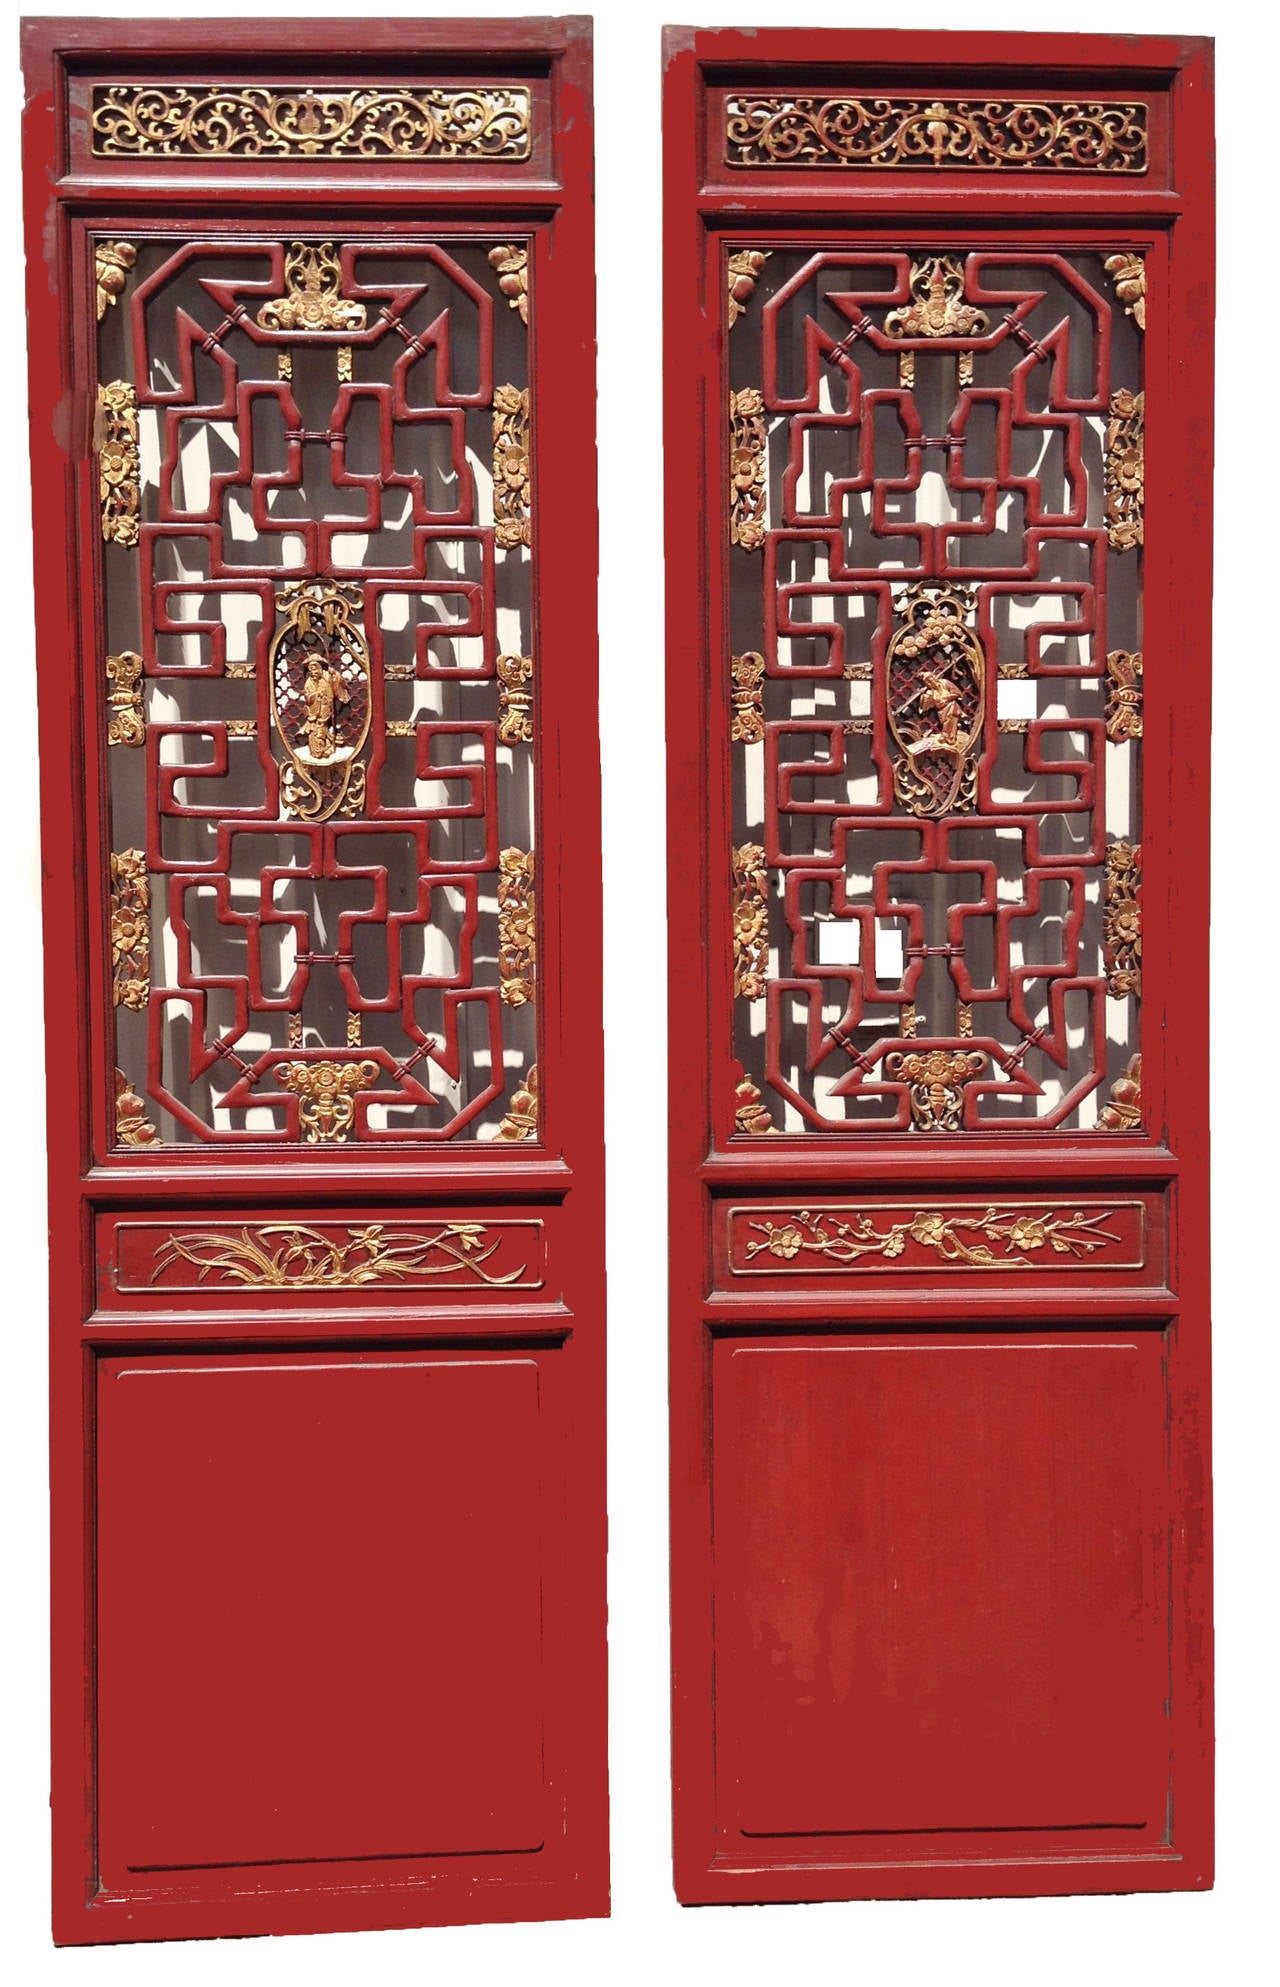 Absolutely stunning carved doors feature multiple auspicious symbols such as bats for good fortune, peaches for long life, butterflies for happiness and scrolls for eternity. Center of the door depict the scholar's joy of leisure life. Carvings are